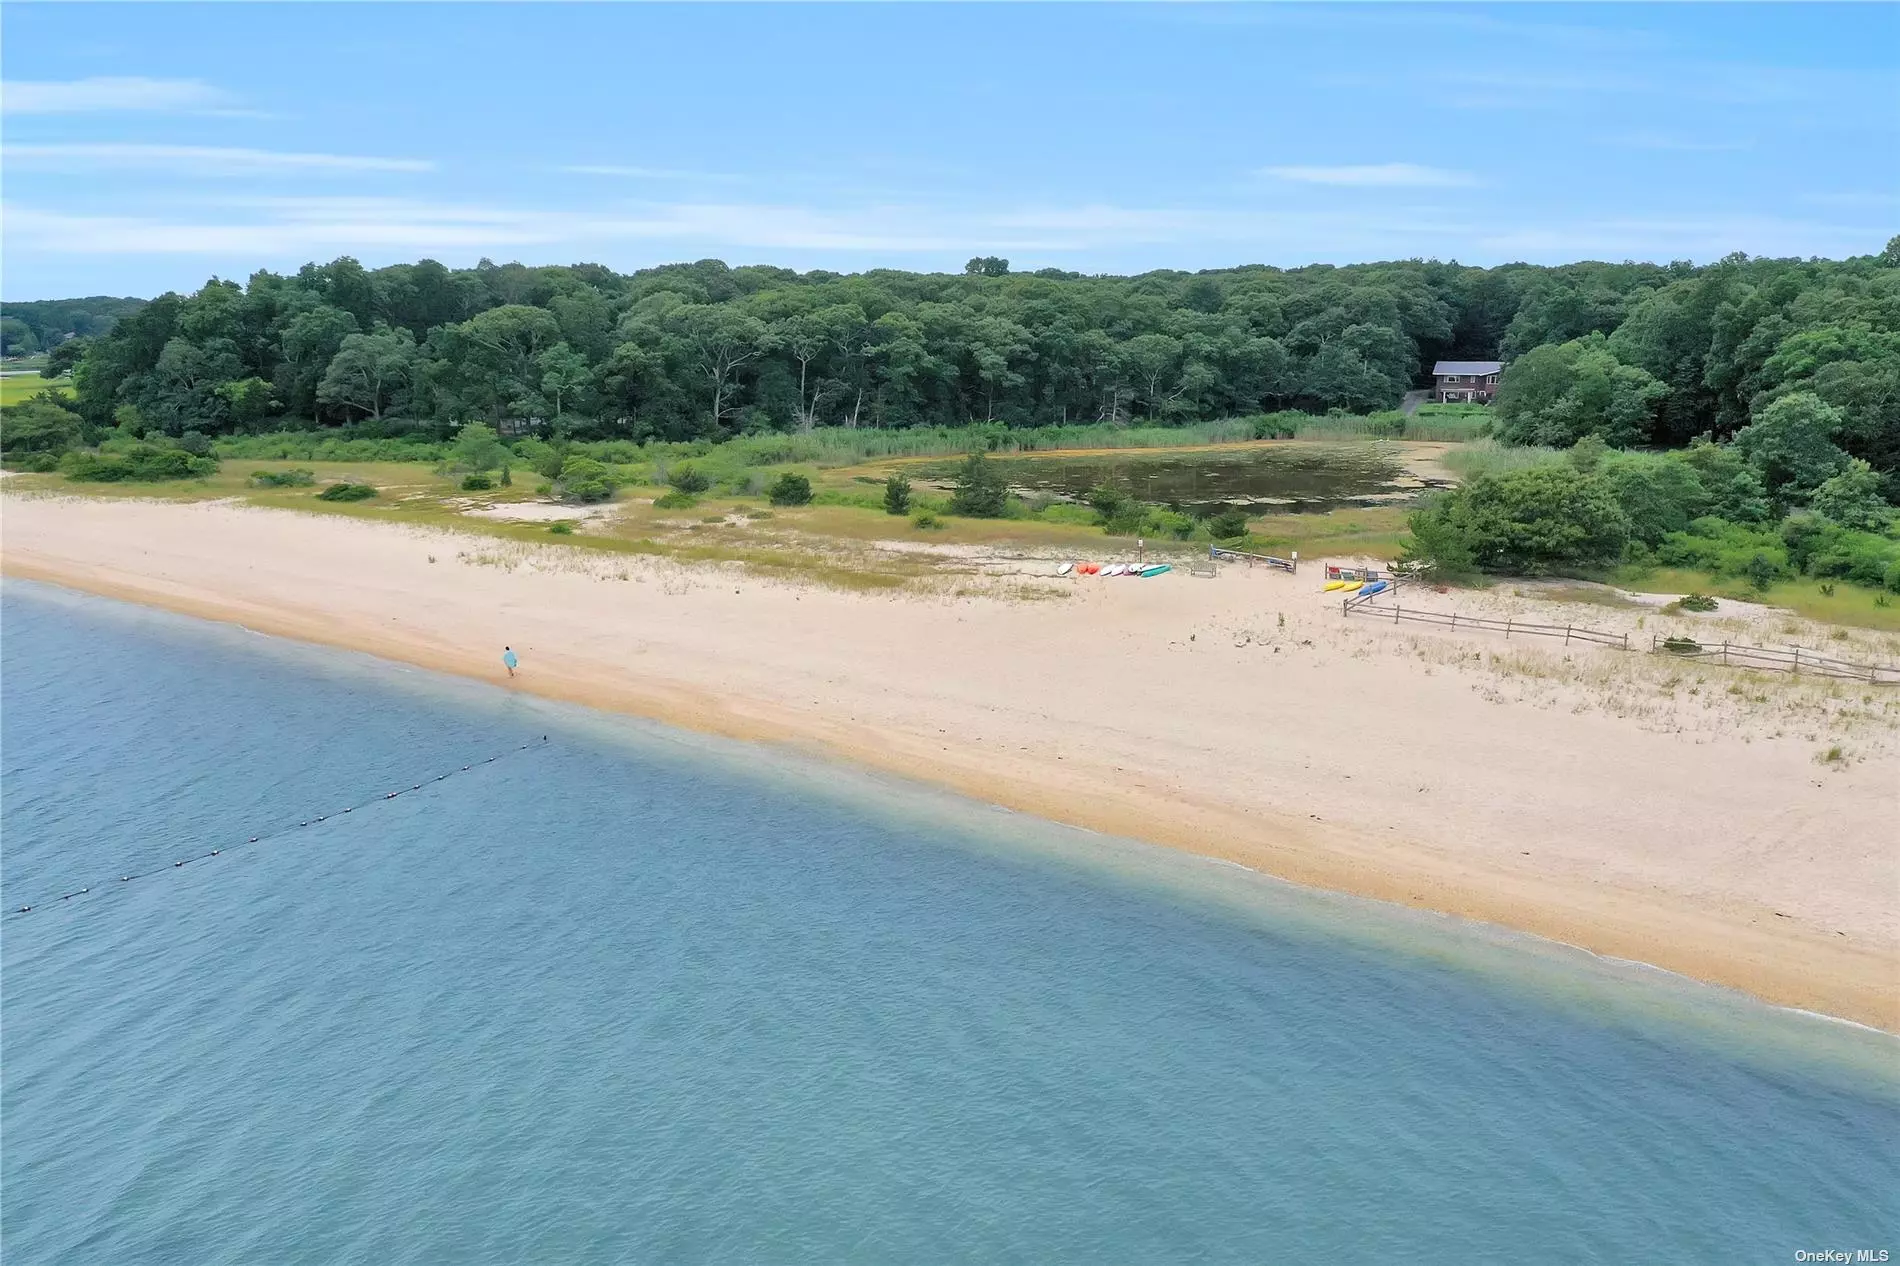 Arrowhead Cove, Peconic- A rare opportunity to build your dream home in this premier location with one of the best bay beaches on the North Fork. Beautiful, corner one acre parcel. Level, with southern and westerly light, and gorgeous sunsets. Arrowhead Cove Association&rsquo;s 240-foot-wide sandy bay beach is a short stroll away. A natural wildlife, three-acre tranquil pond adjoins the beach and welcomes ice skaters. Richmond Creek boat ramp is nearby. Close to restaurants, farm stands, wineries, breweries and all North Fork activities.